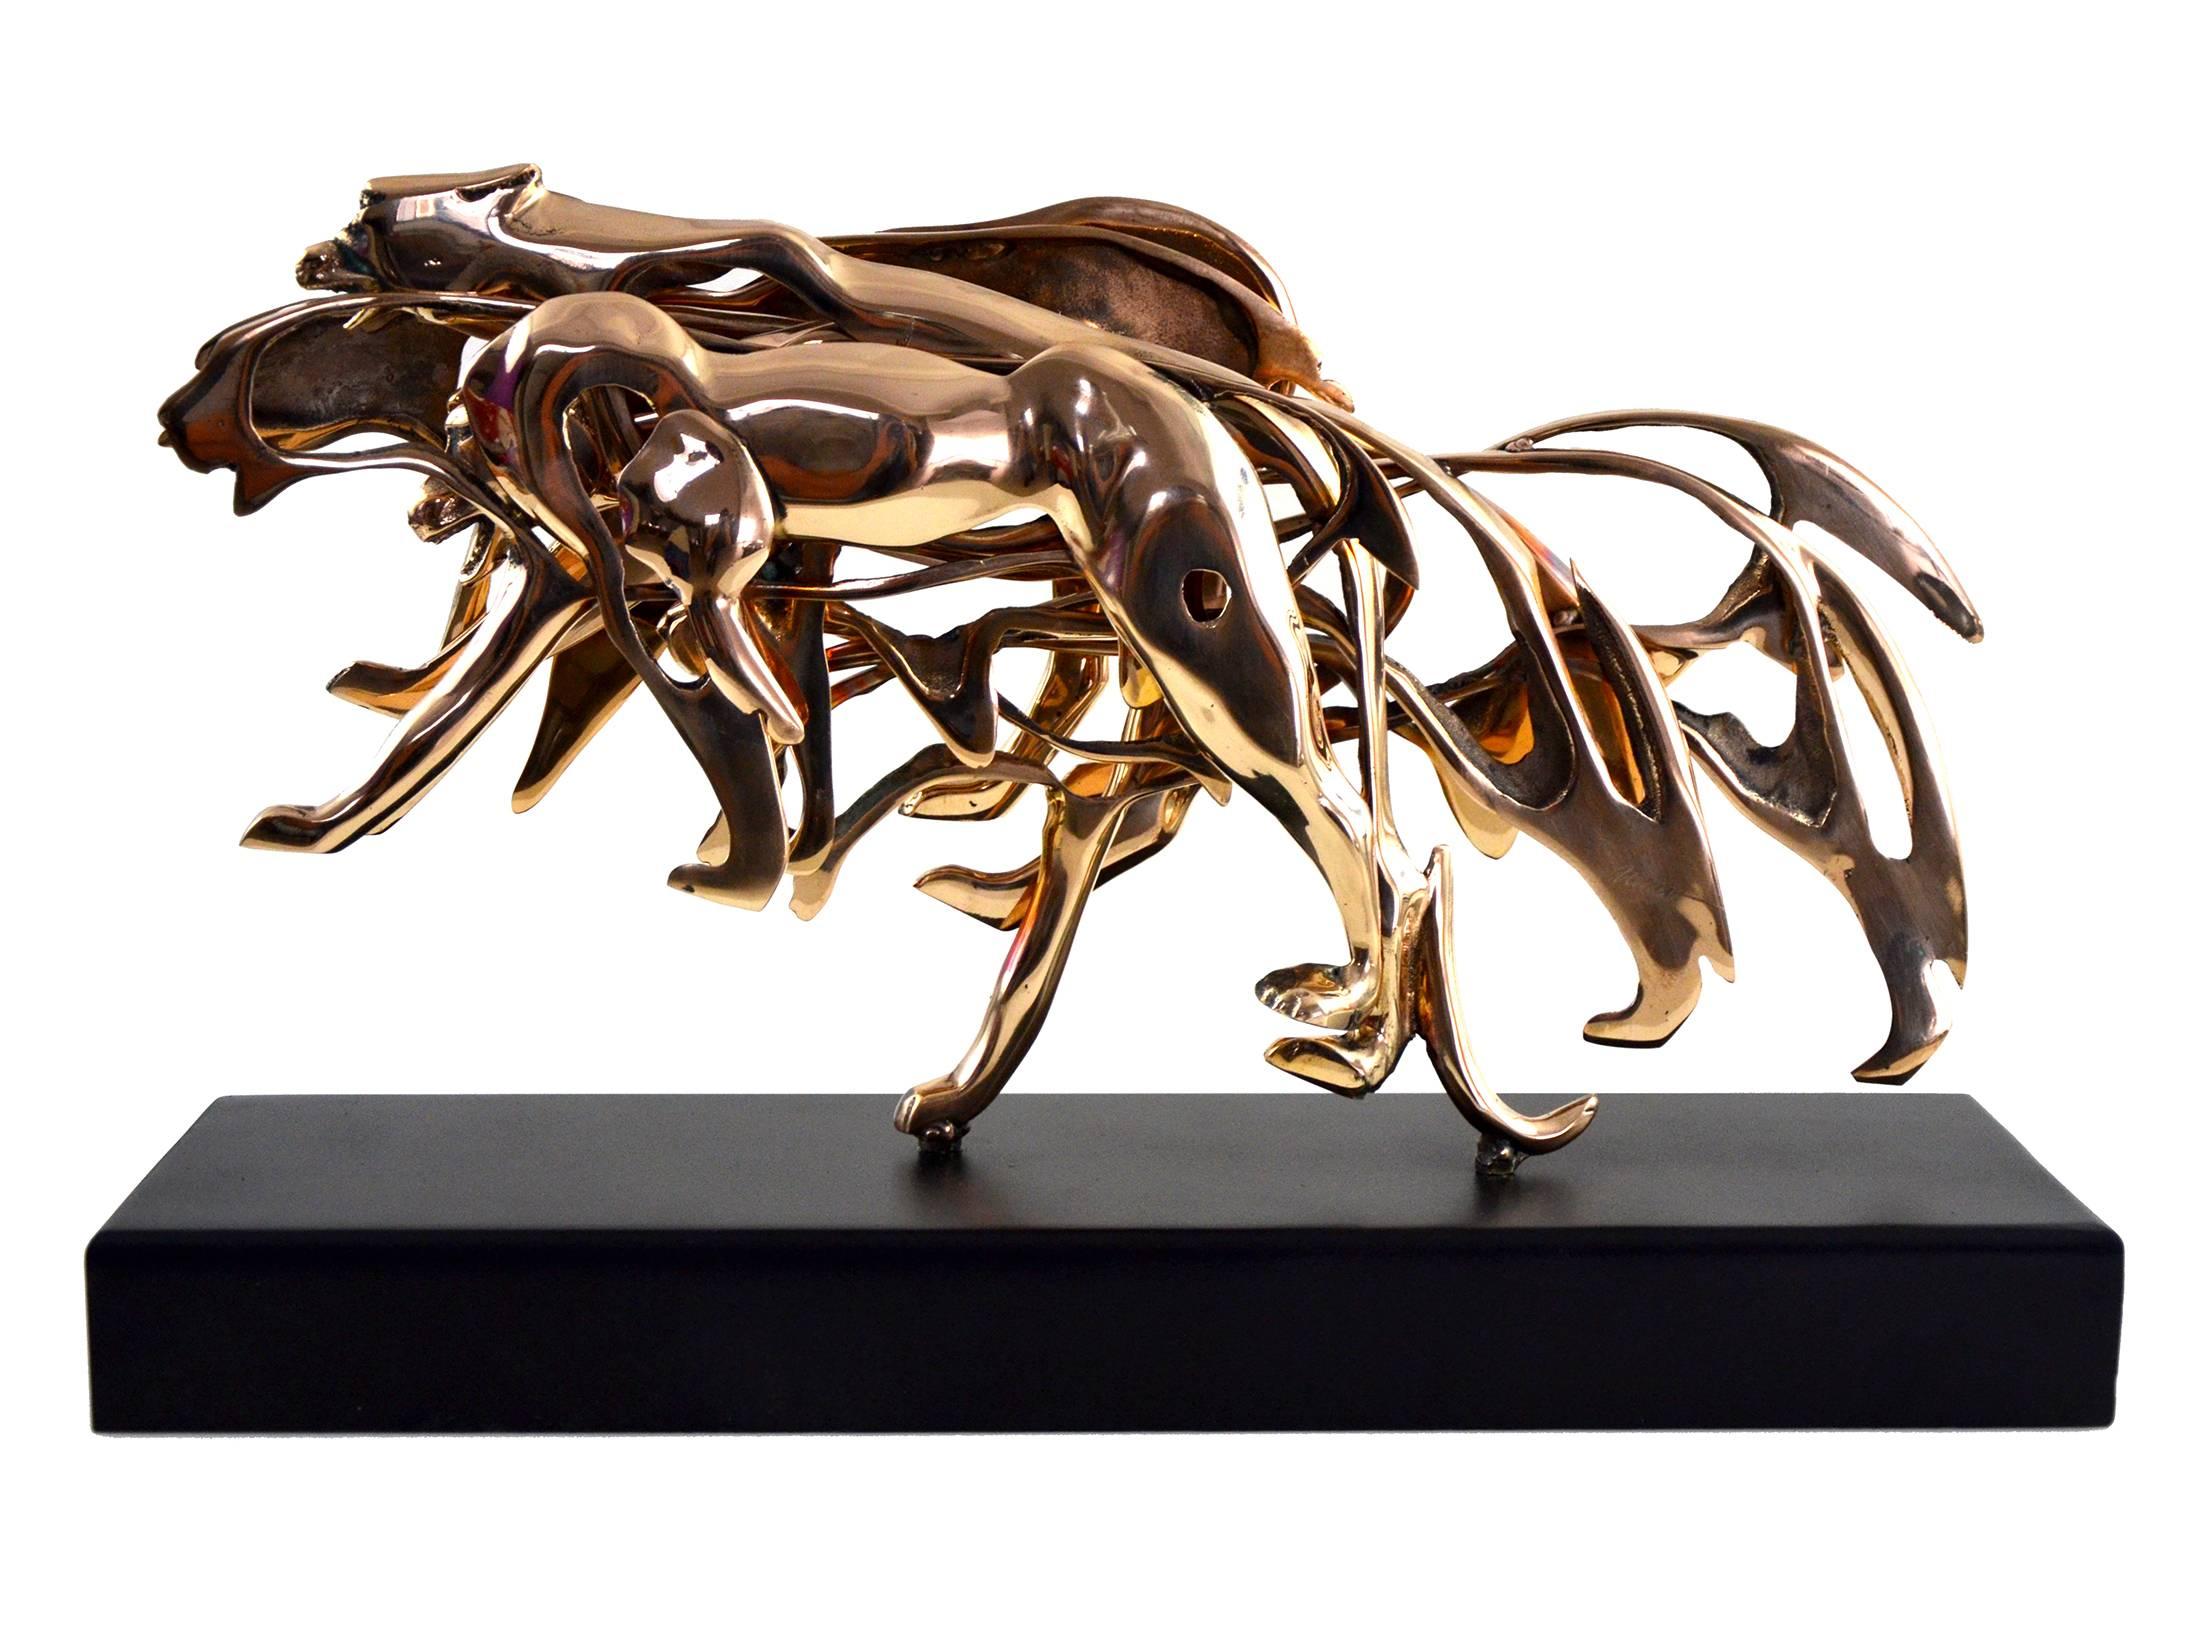 Arman - Gilded Panther - Signed Bronze Sculpture
His animal sculptures are very rare and recognized for their originality and their beauty.

Material: Bronze.
Signed and Numbered
Dimensions: 31 x 50 x 9 cm
With Certificate of Authenticity by the